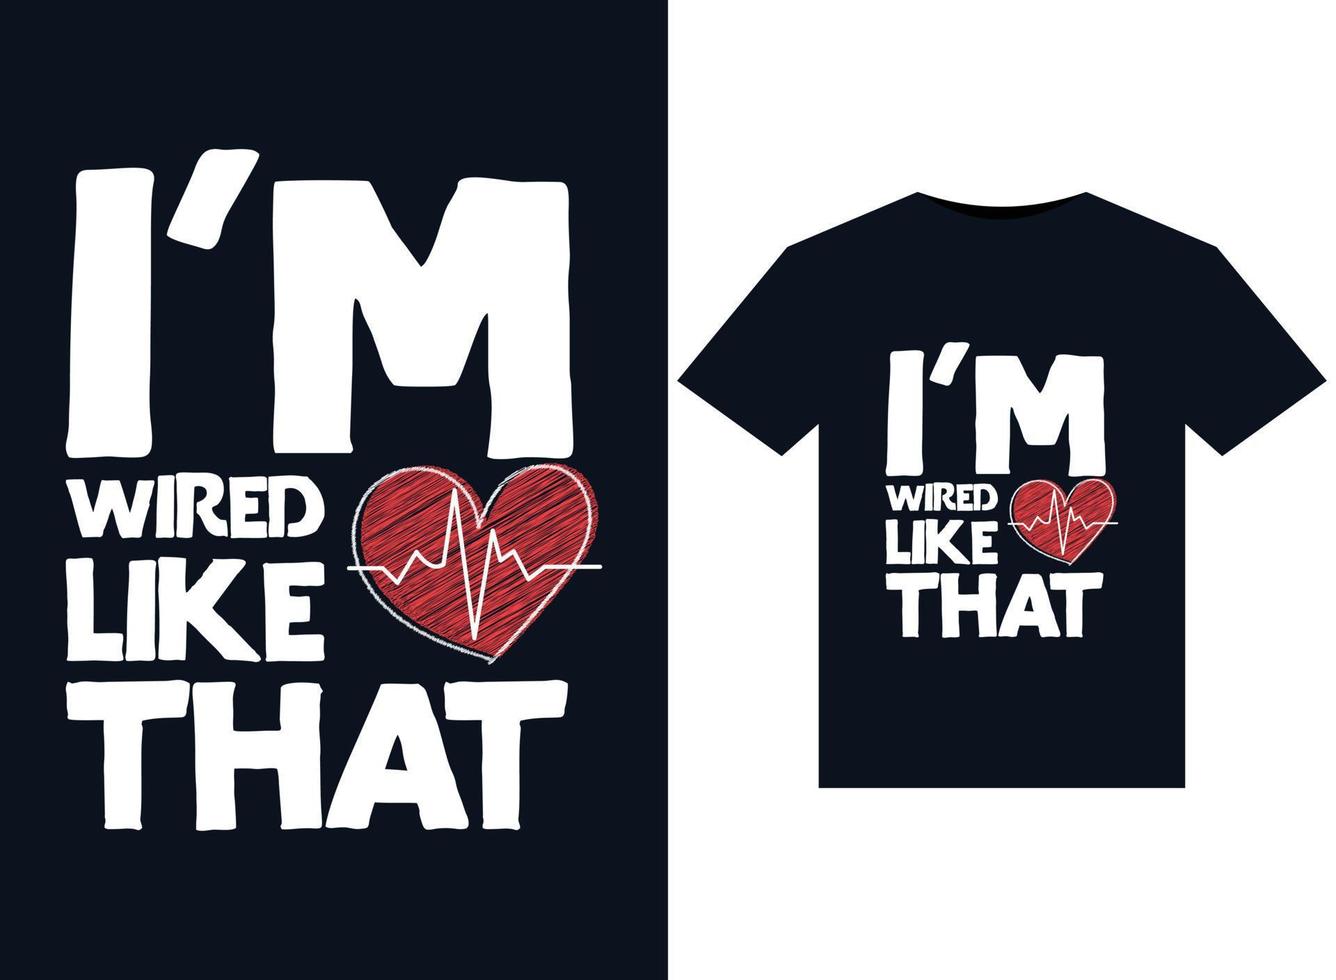 I'm Wired Like That illustrations for print-ready T-Shirts design vector